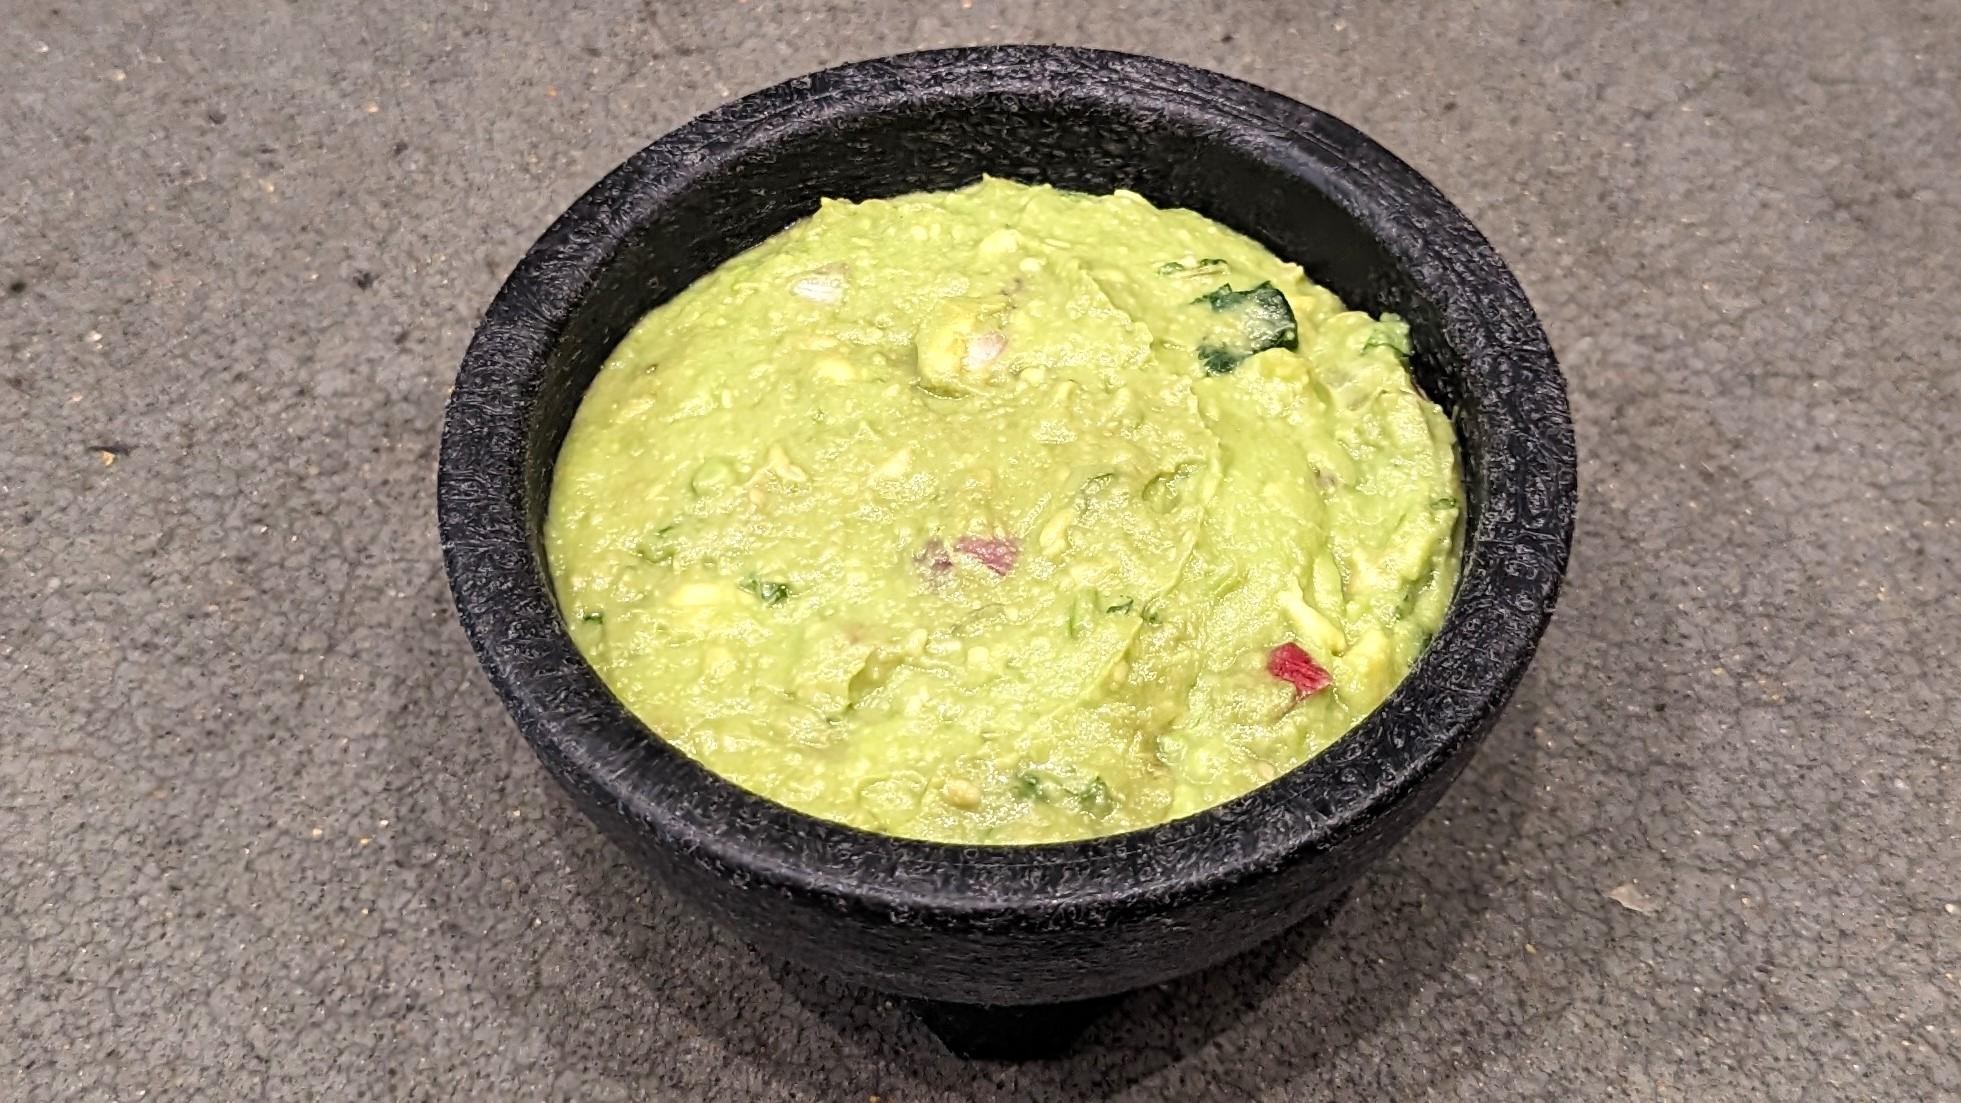 Large Guacamole Only